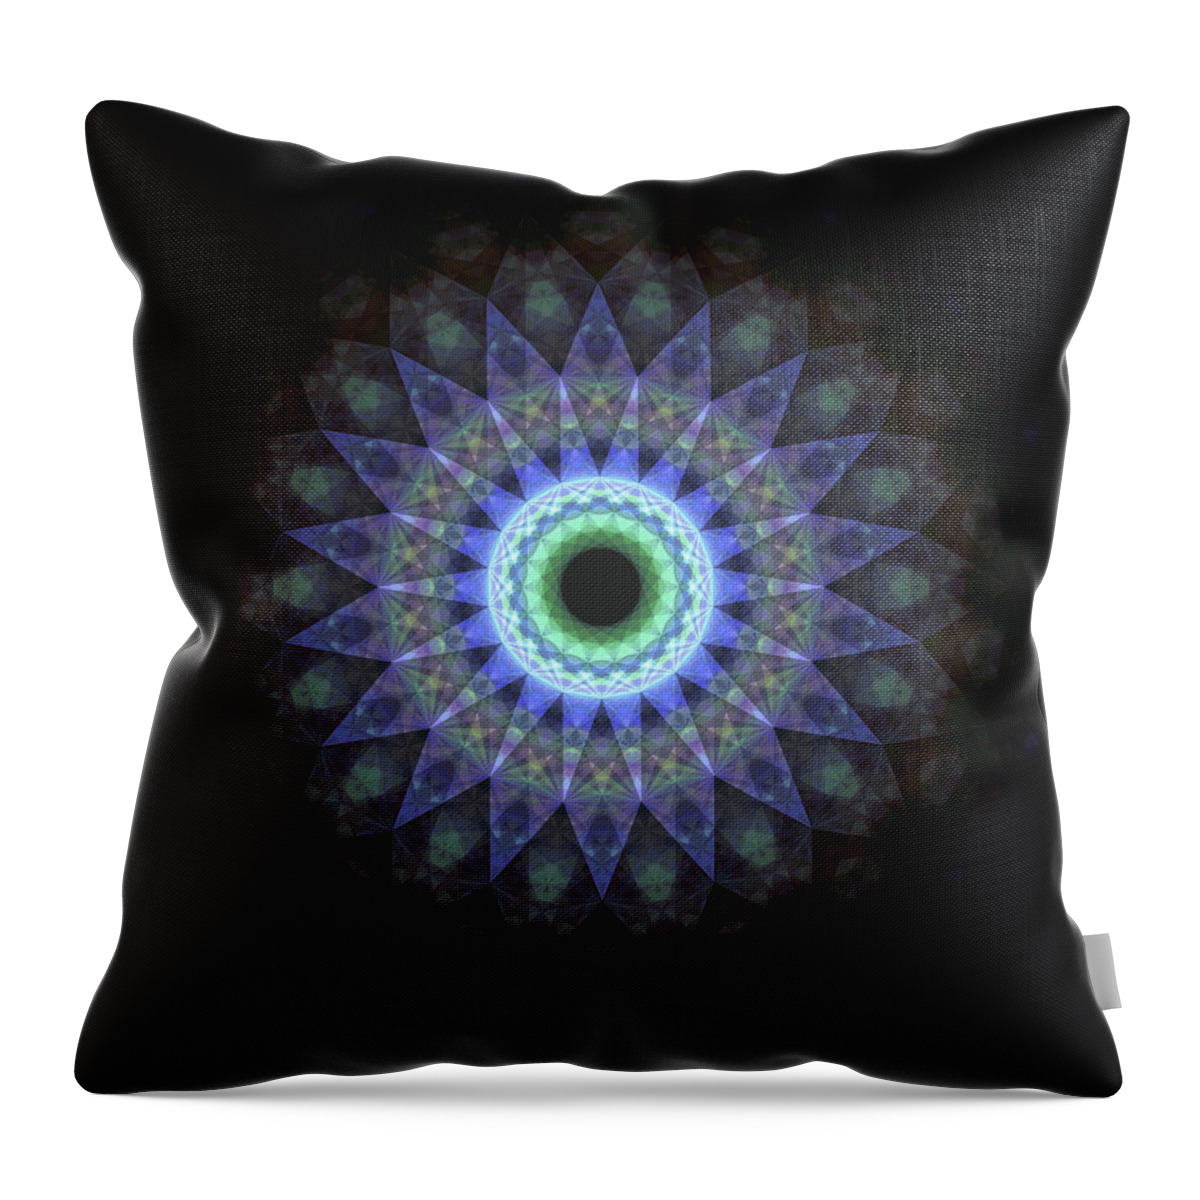  Throw Pillow featuring the digital art P 2l 18d by Primary Design Co